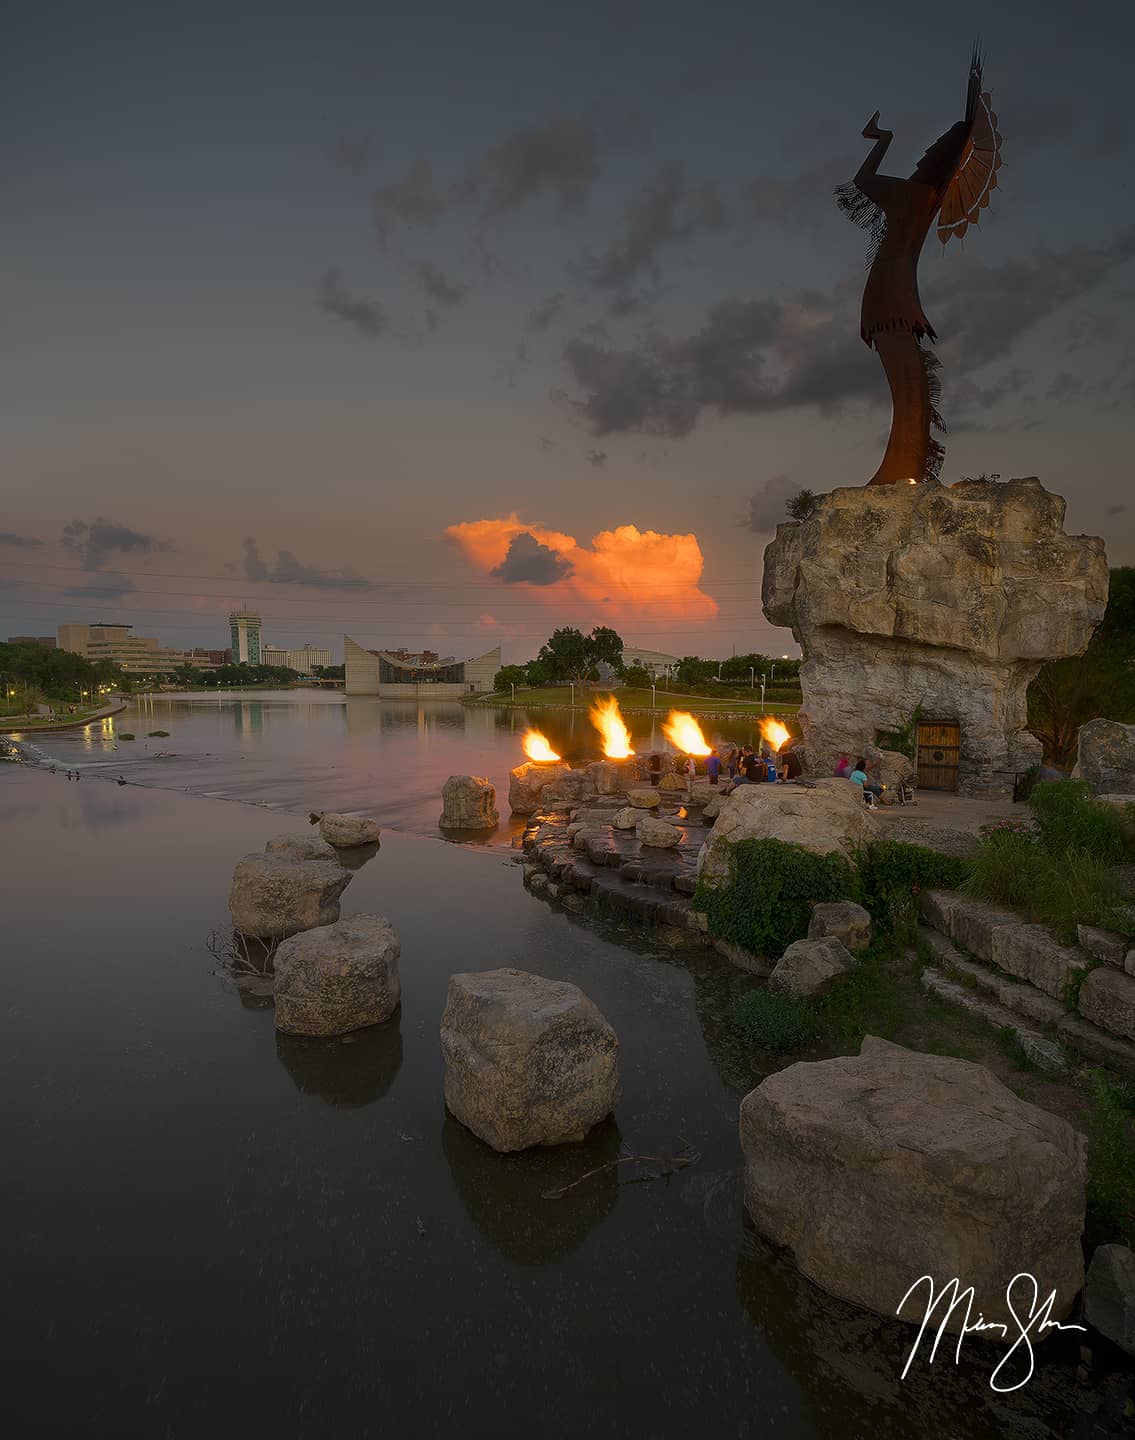 Fire and Storm at the Keeper - The Keeper of the Plains, Wichita, Kansas